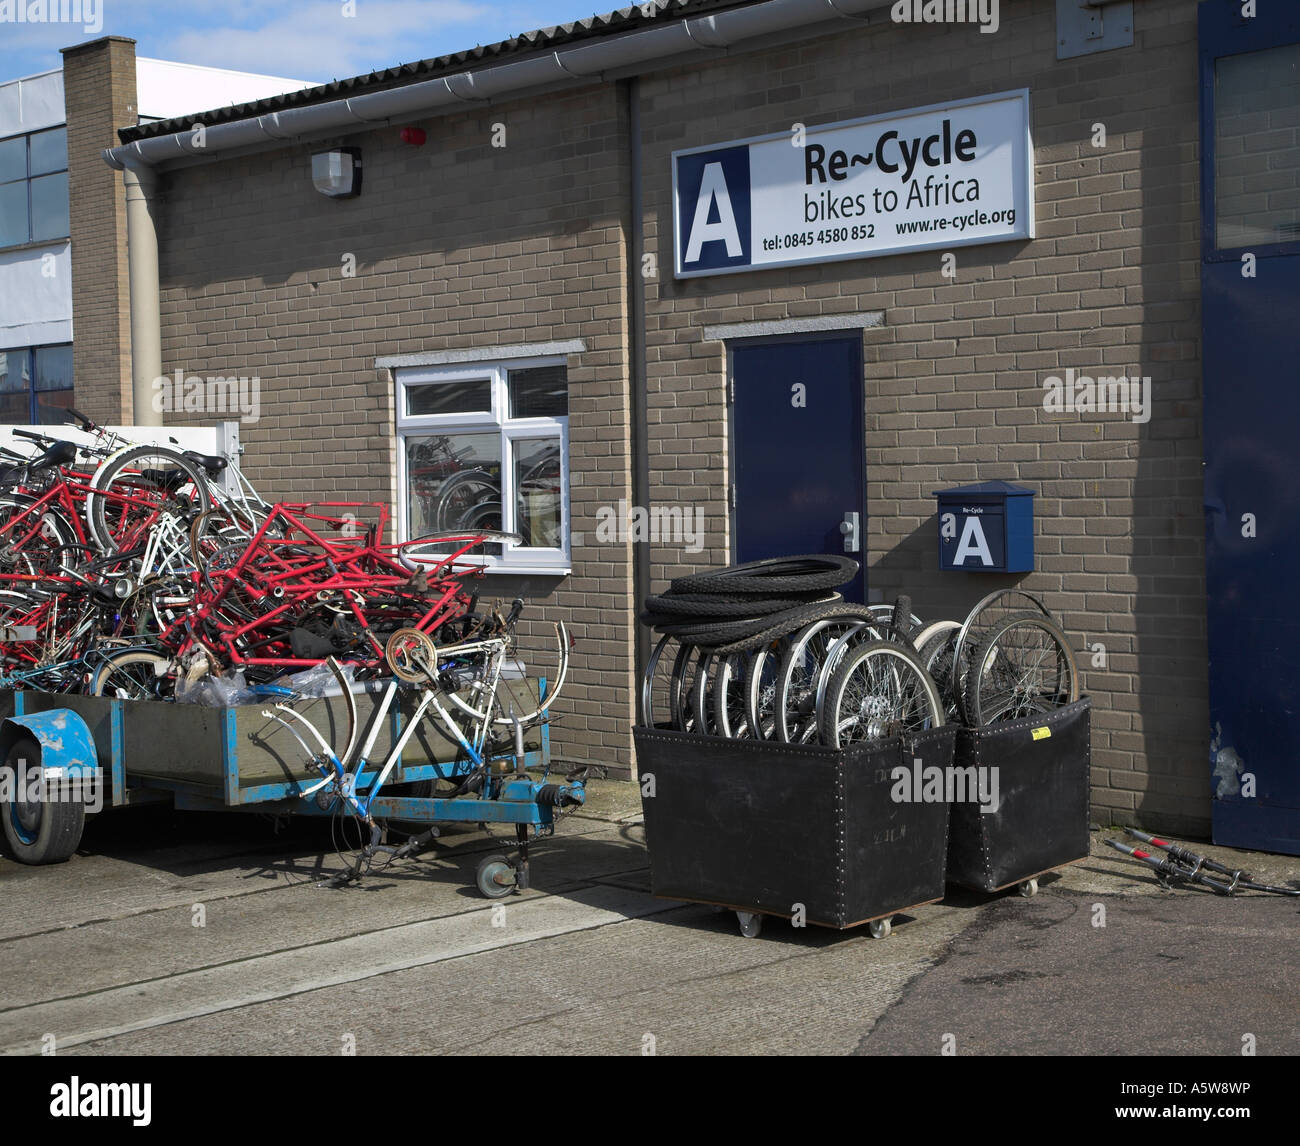 Re-Cycle charity recycling bikes for Africa, Colchester, Essex, England Stock Photo